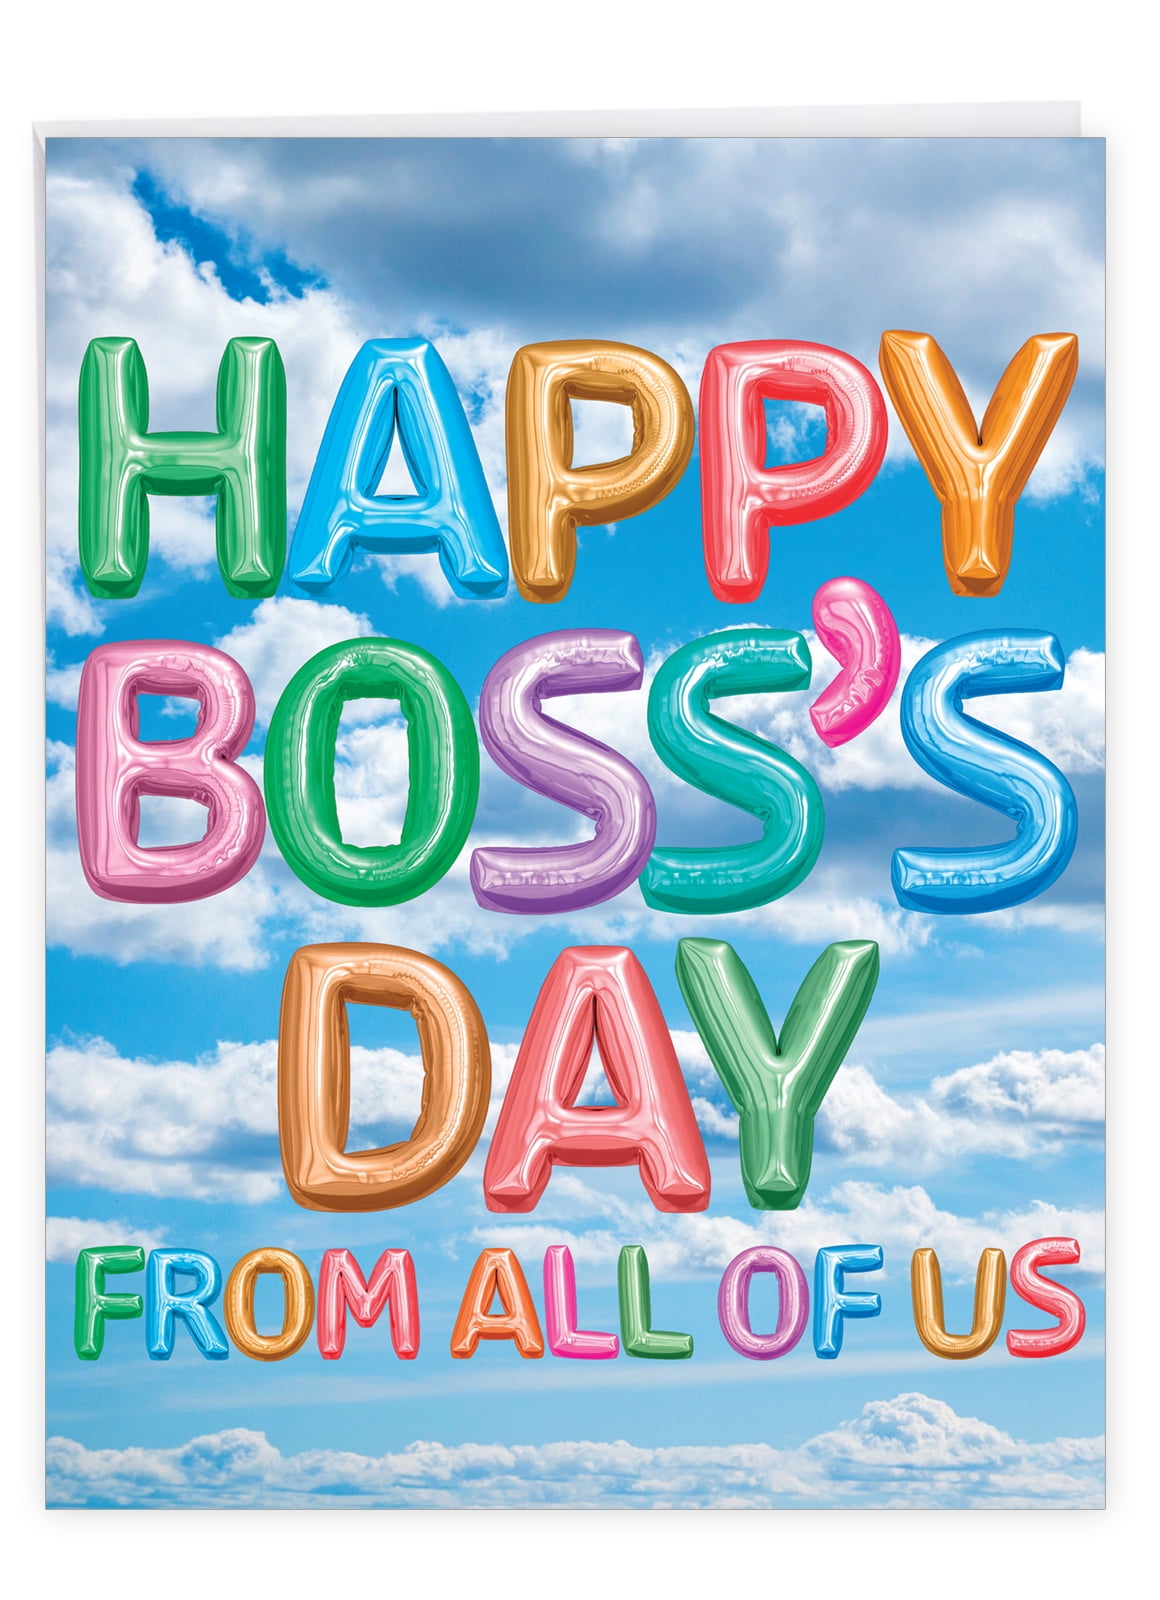 Big Happy Boss's Day Card (8.5 x 11 Inch) Group Greeting Card for